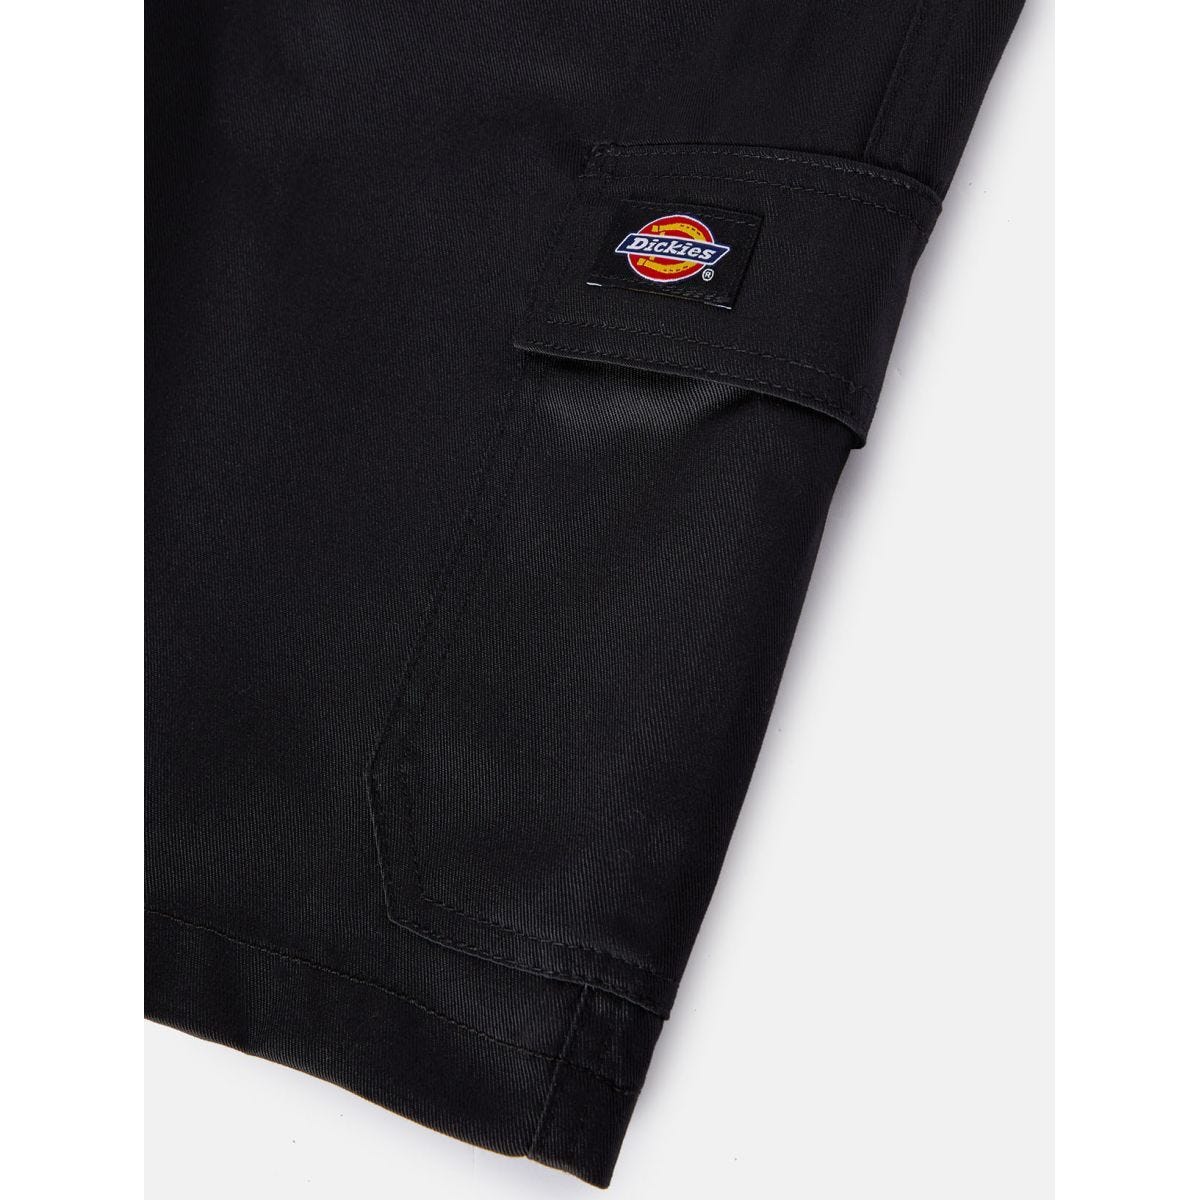 Short Everyday Noir - Dickies - Taille 42 4